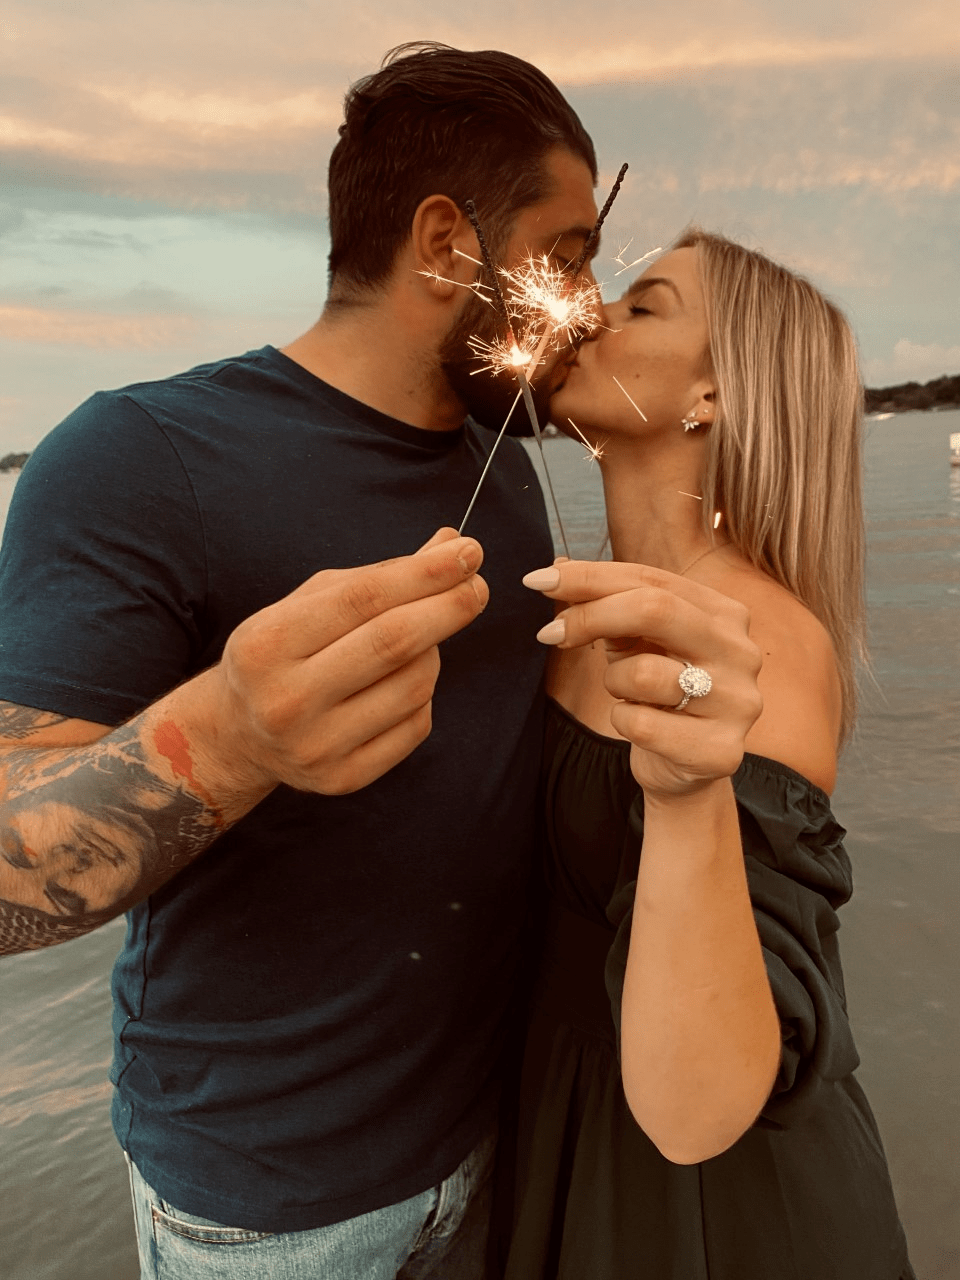 Cassandra and Anthony kiss each other and holding sparkler in his hand